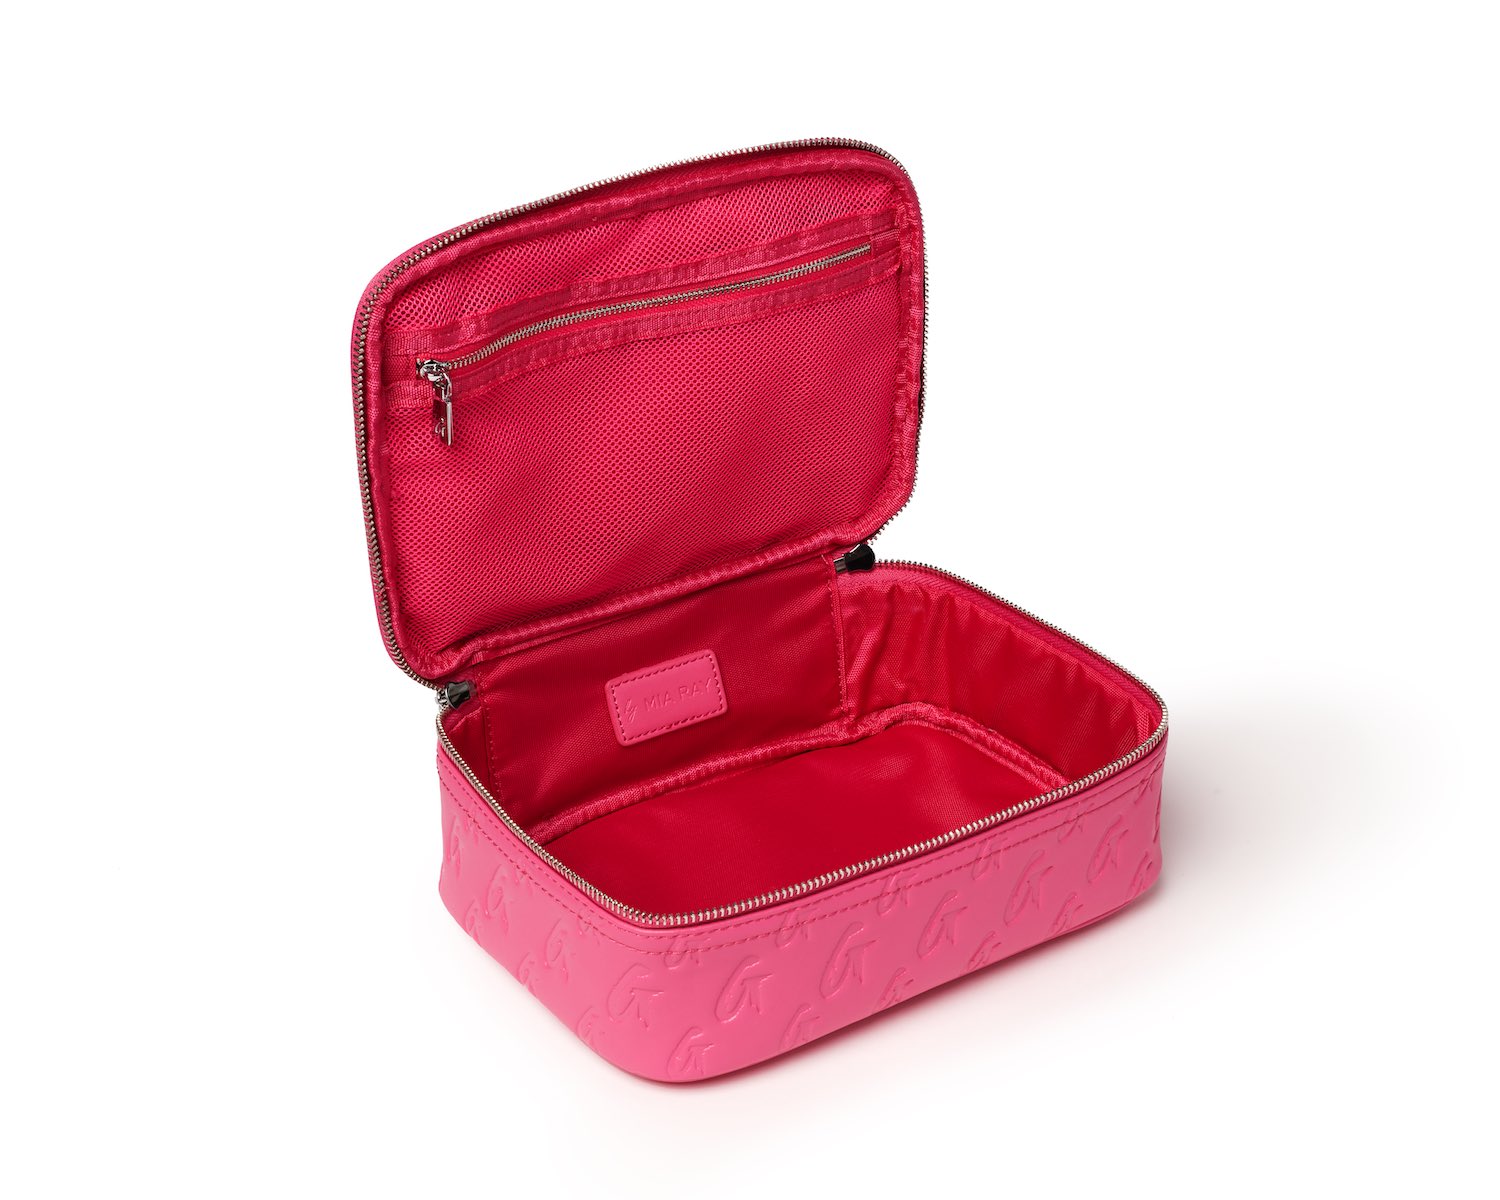 MONOGRAM COSMETIC POUCH HOT PINK – Glam-Aholic Lifestyle